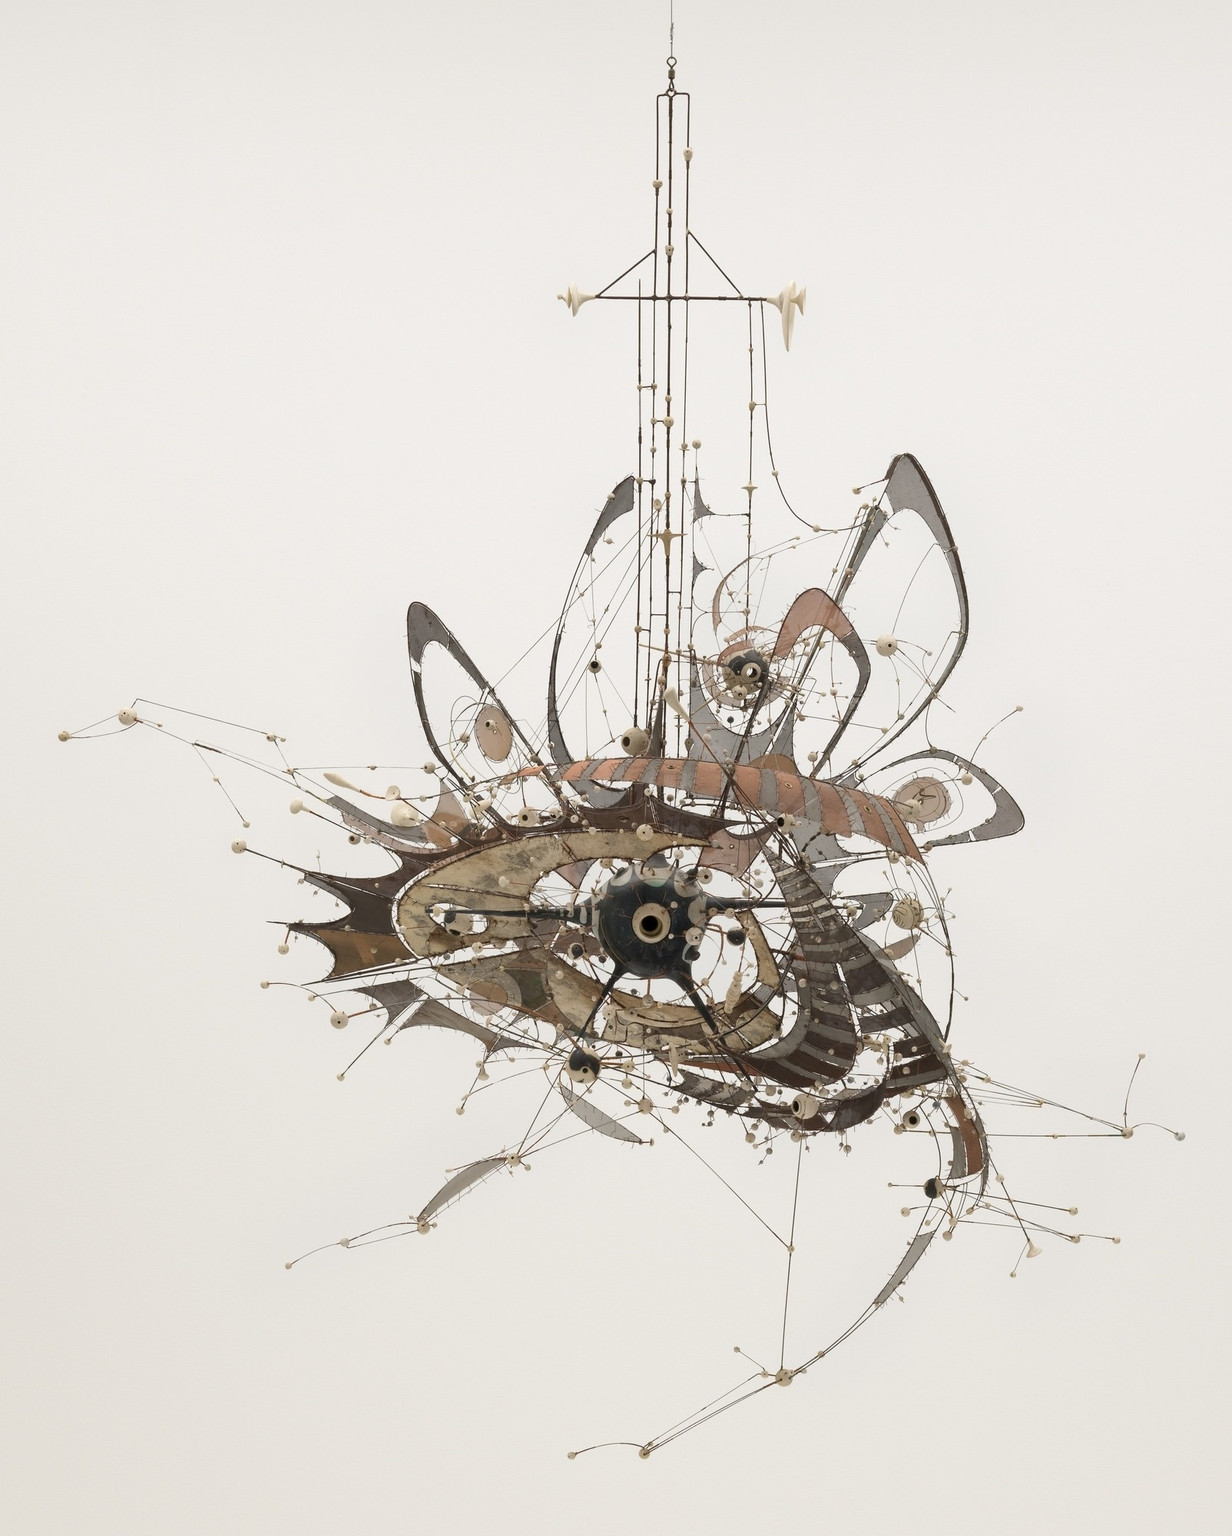 Lee Bontecou (American, born 1931). Untitled. 1980-98. Welded steel, porcelain, wire mesh, canvas, grommets, and wire. 7 x 8 x 6' (213.4 x 243.8 x 182.9 cm). Gift of Philip Johnson (by exchange) and the Nina and Gordon Bunshaft Bequest Fund. © 2018 Lee Bontecou